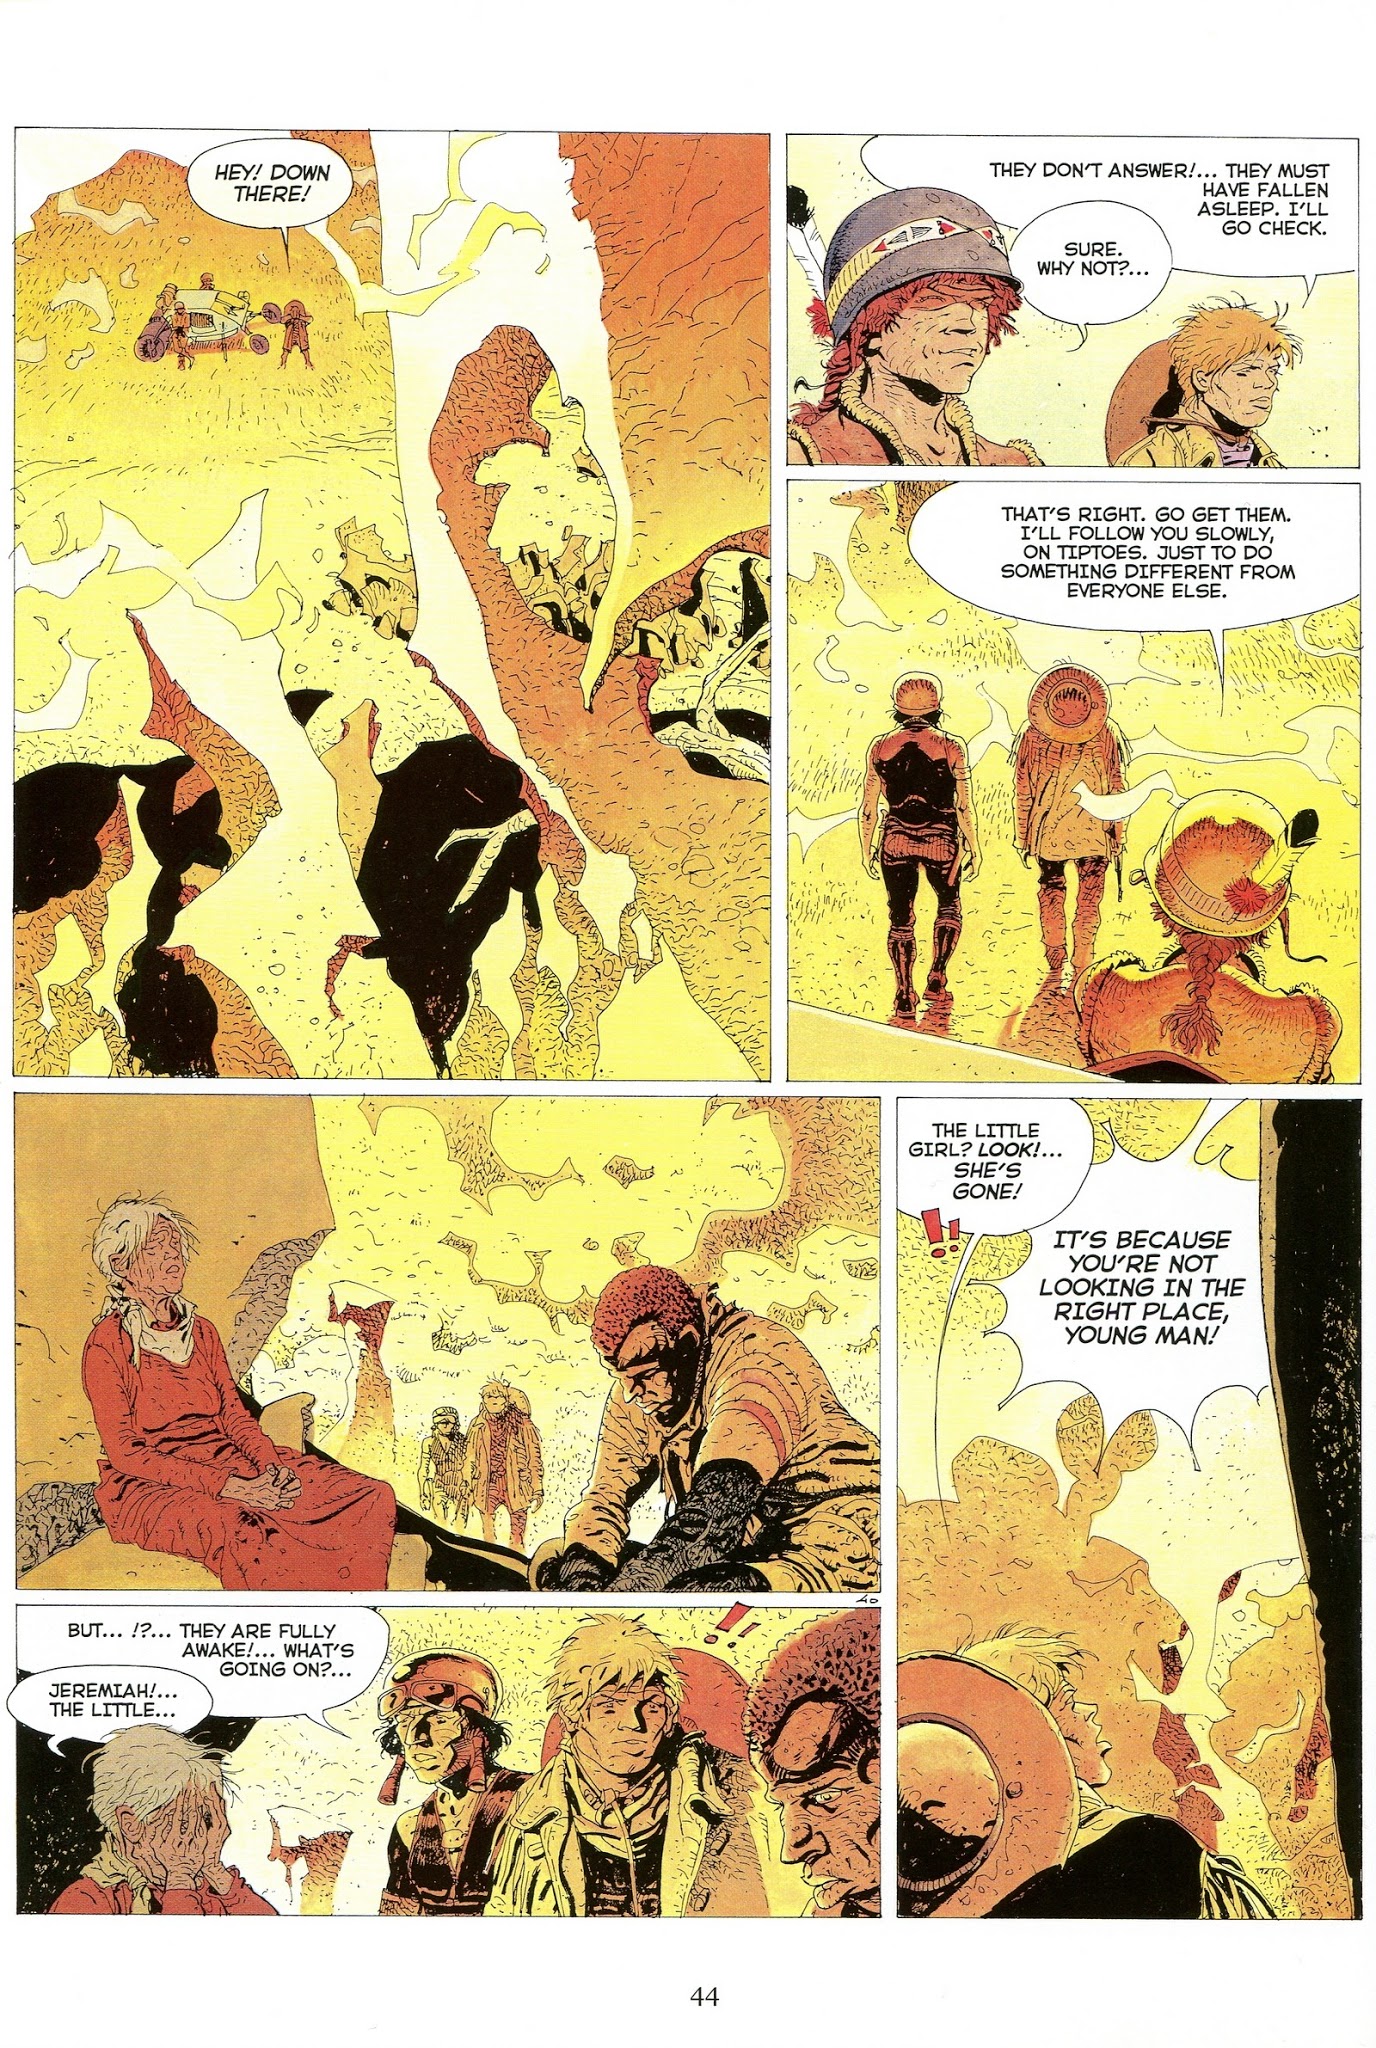 Read online Jeremiah by Hermann comic -  Issue # TPB 2 - 45